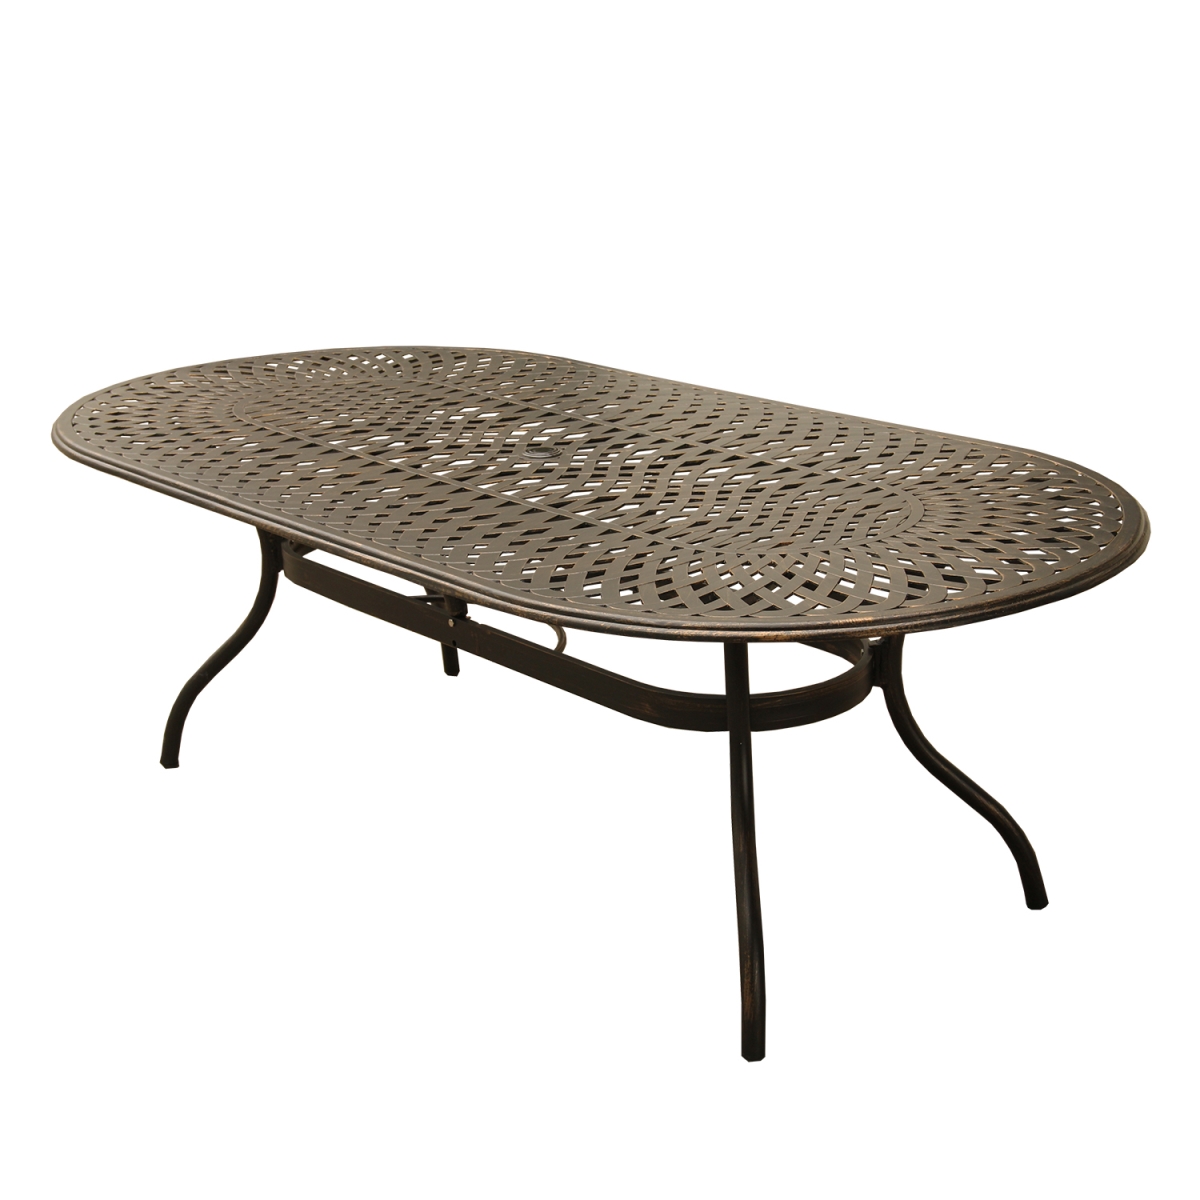 Oakland Living 1025-oval-95-mesh-table-bz 95 In. Contemporary Modern Outdoor Mesh Lattice Aluminium Oval Dining Table, Bronze